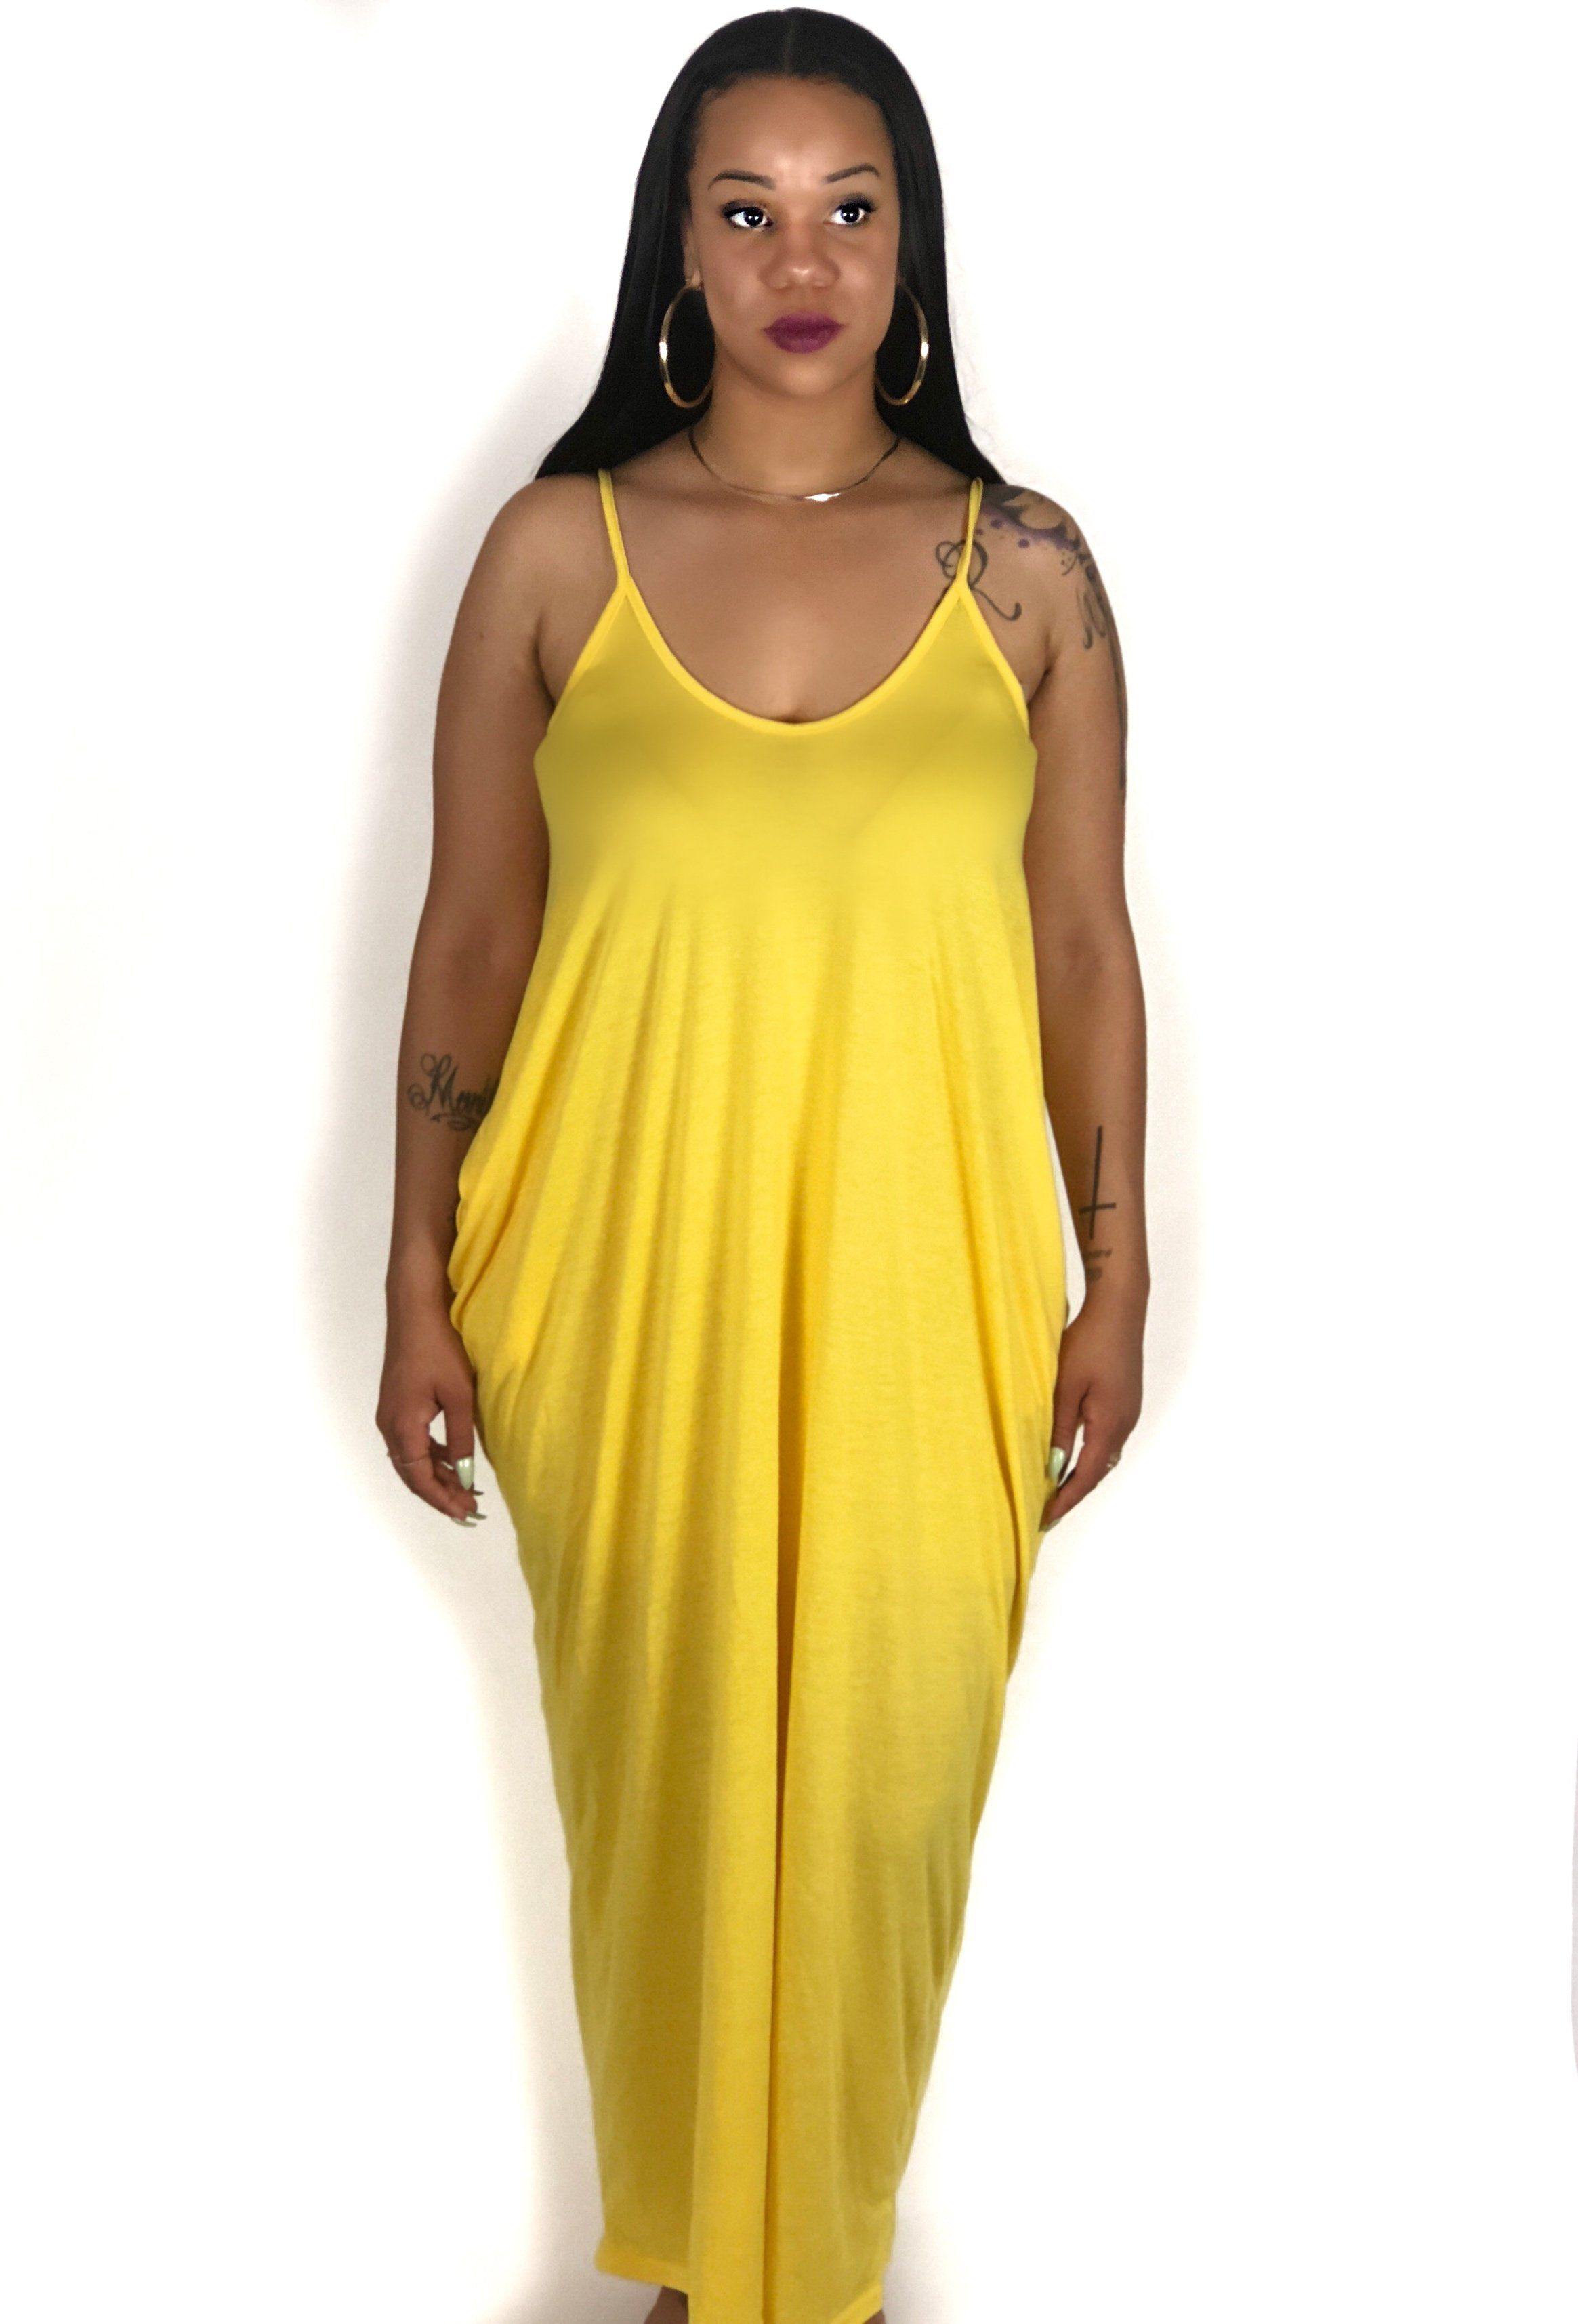 You are my Sunshine Sundress - Shop Besos Boutique